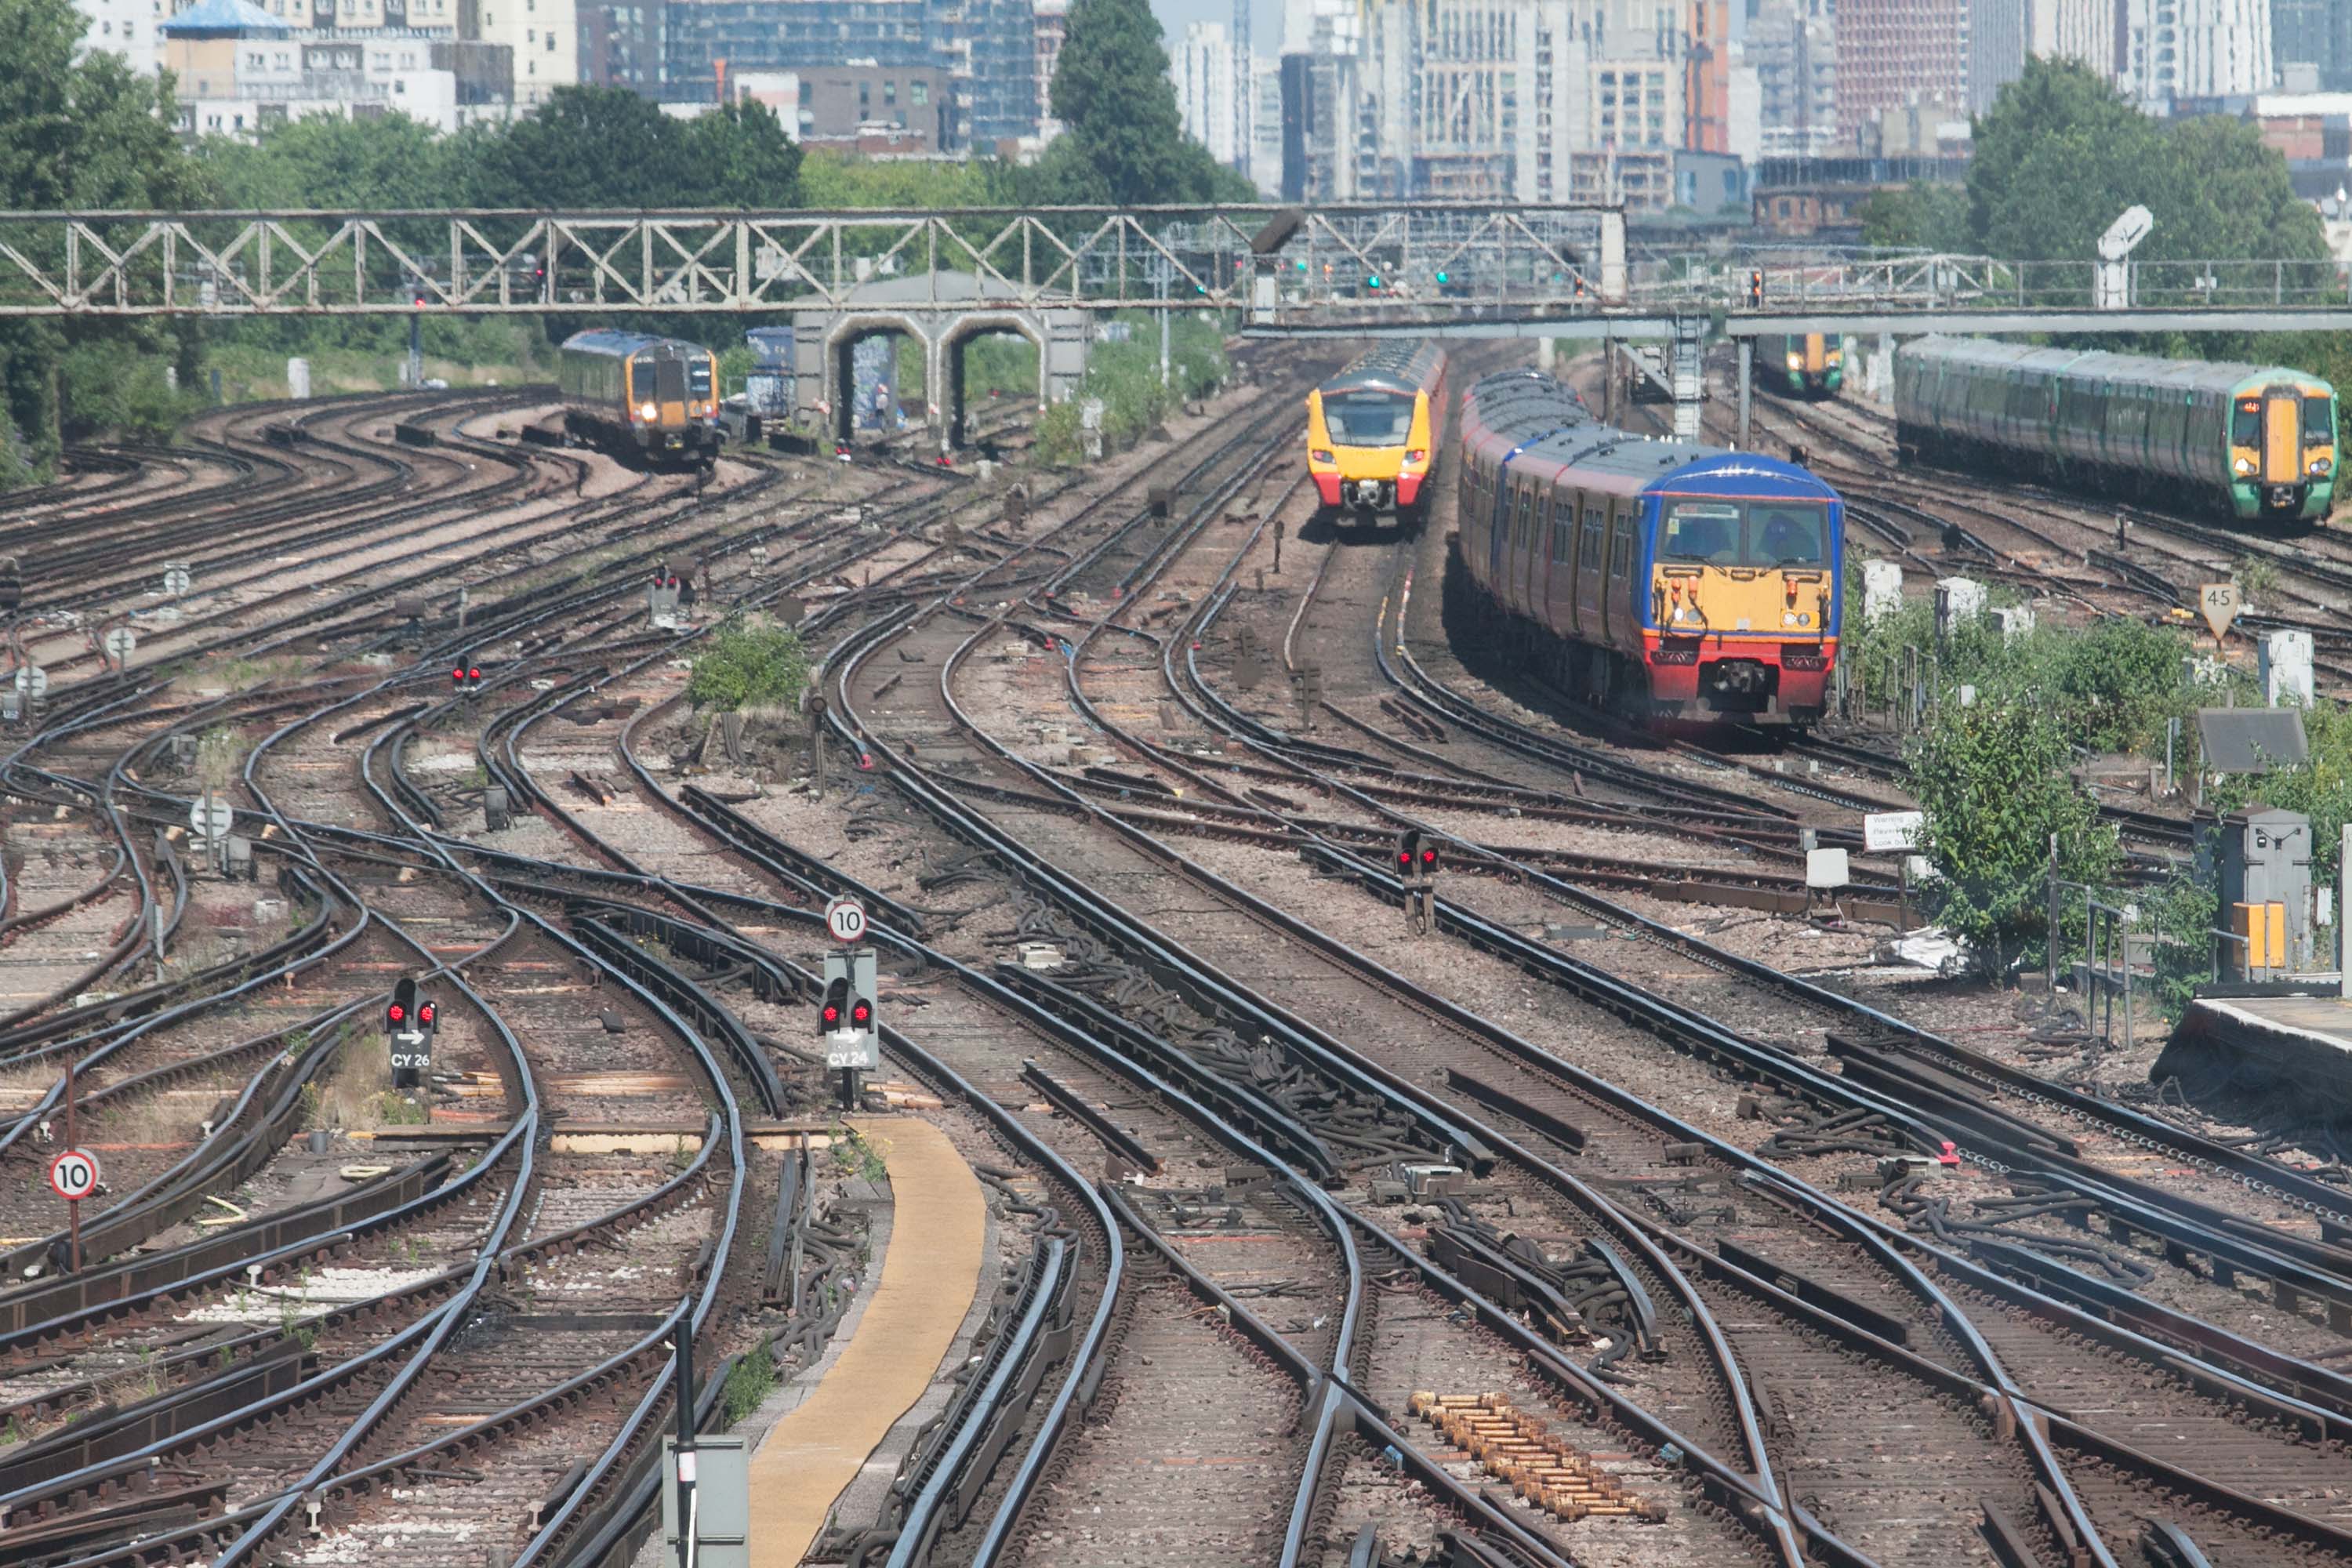 A photo of London railways taken during the last heat wave in June.